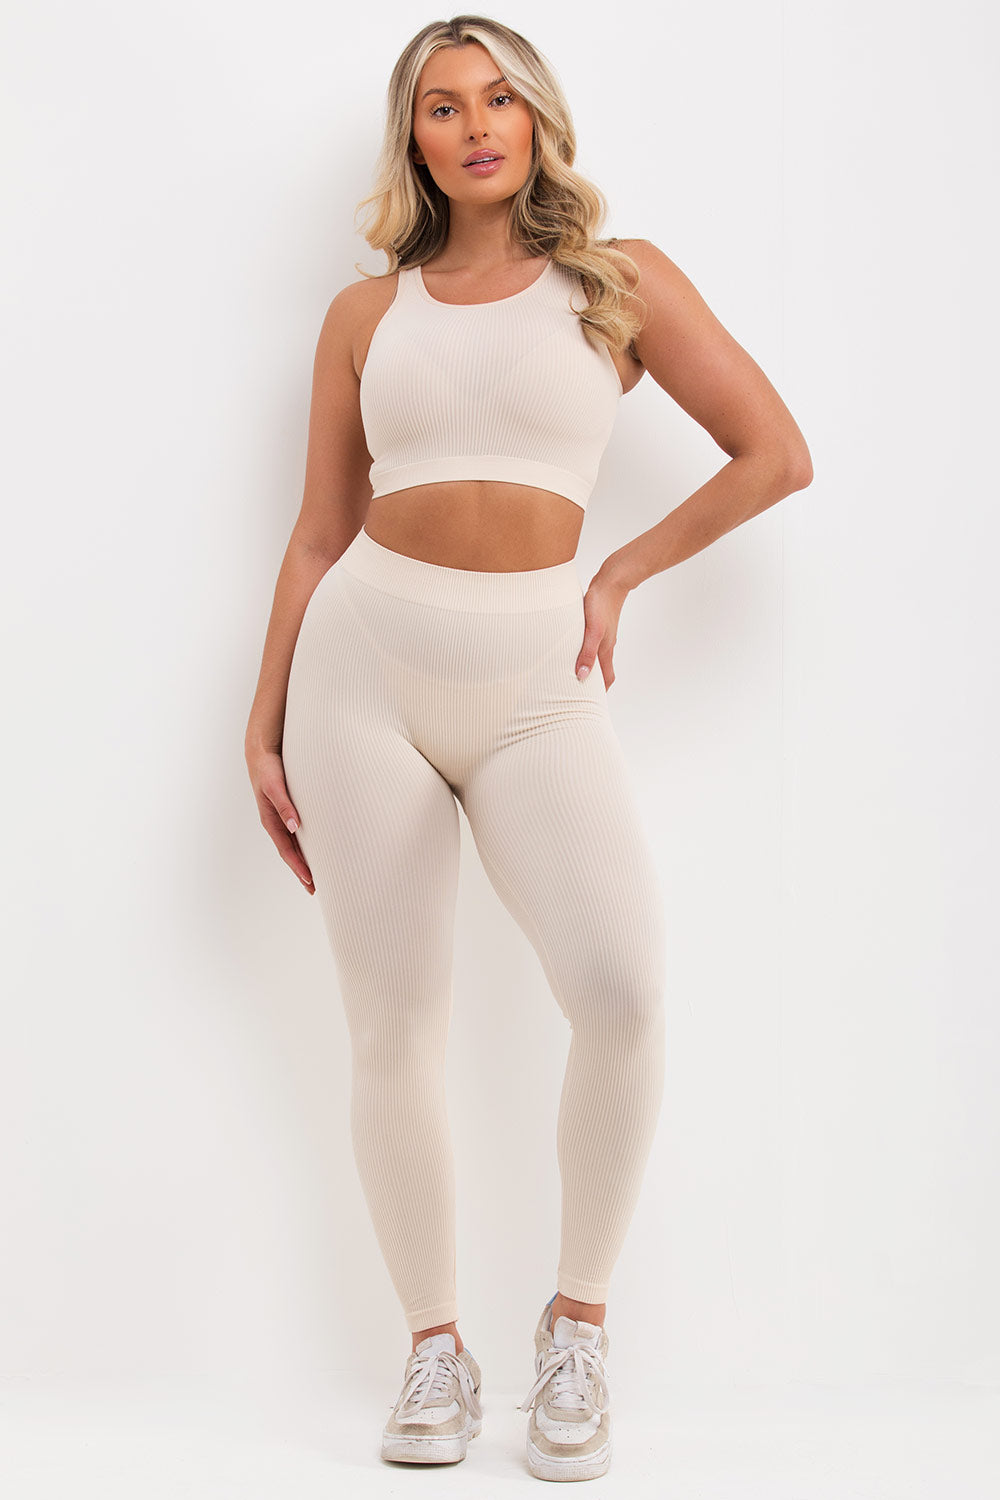 ribbed leggings and crop top co ord set uk